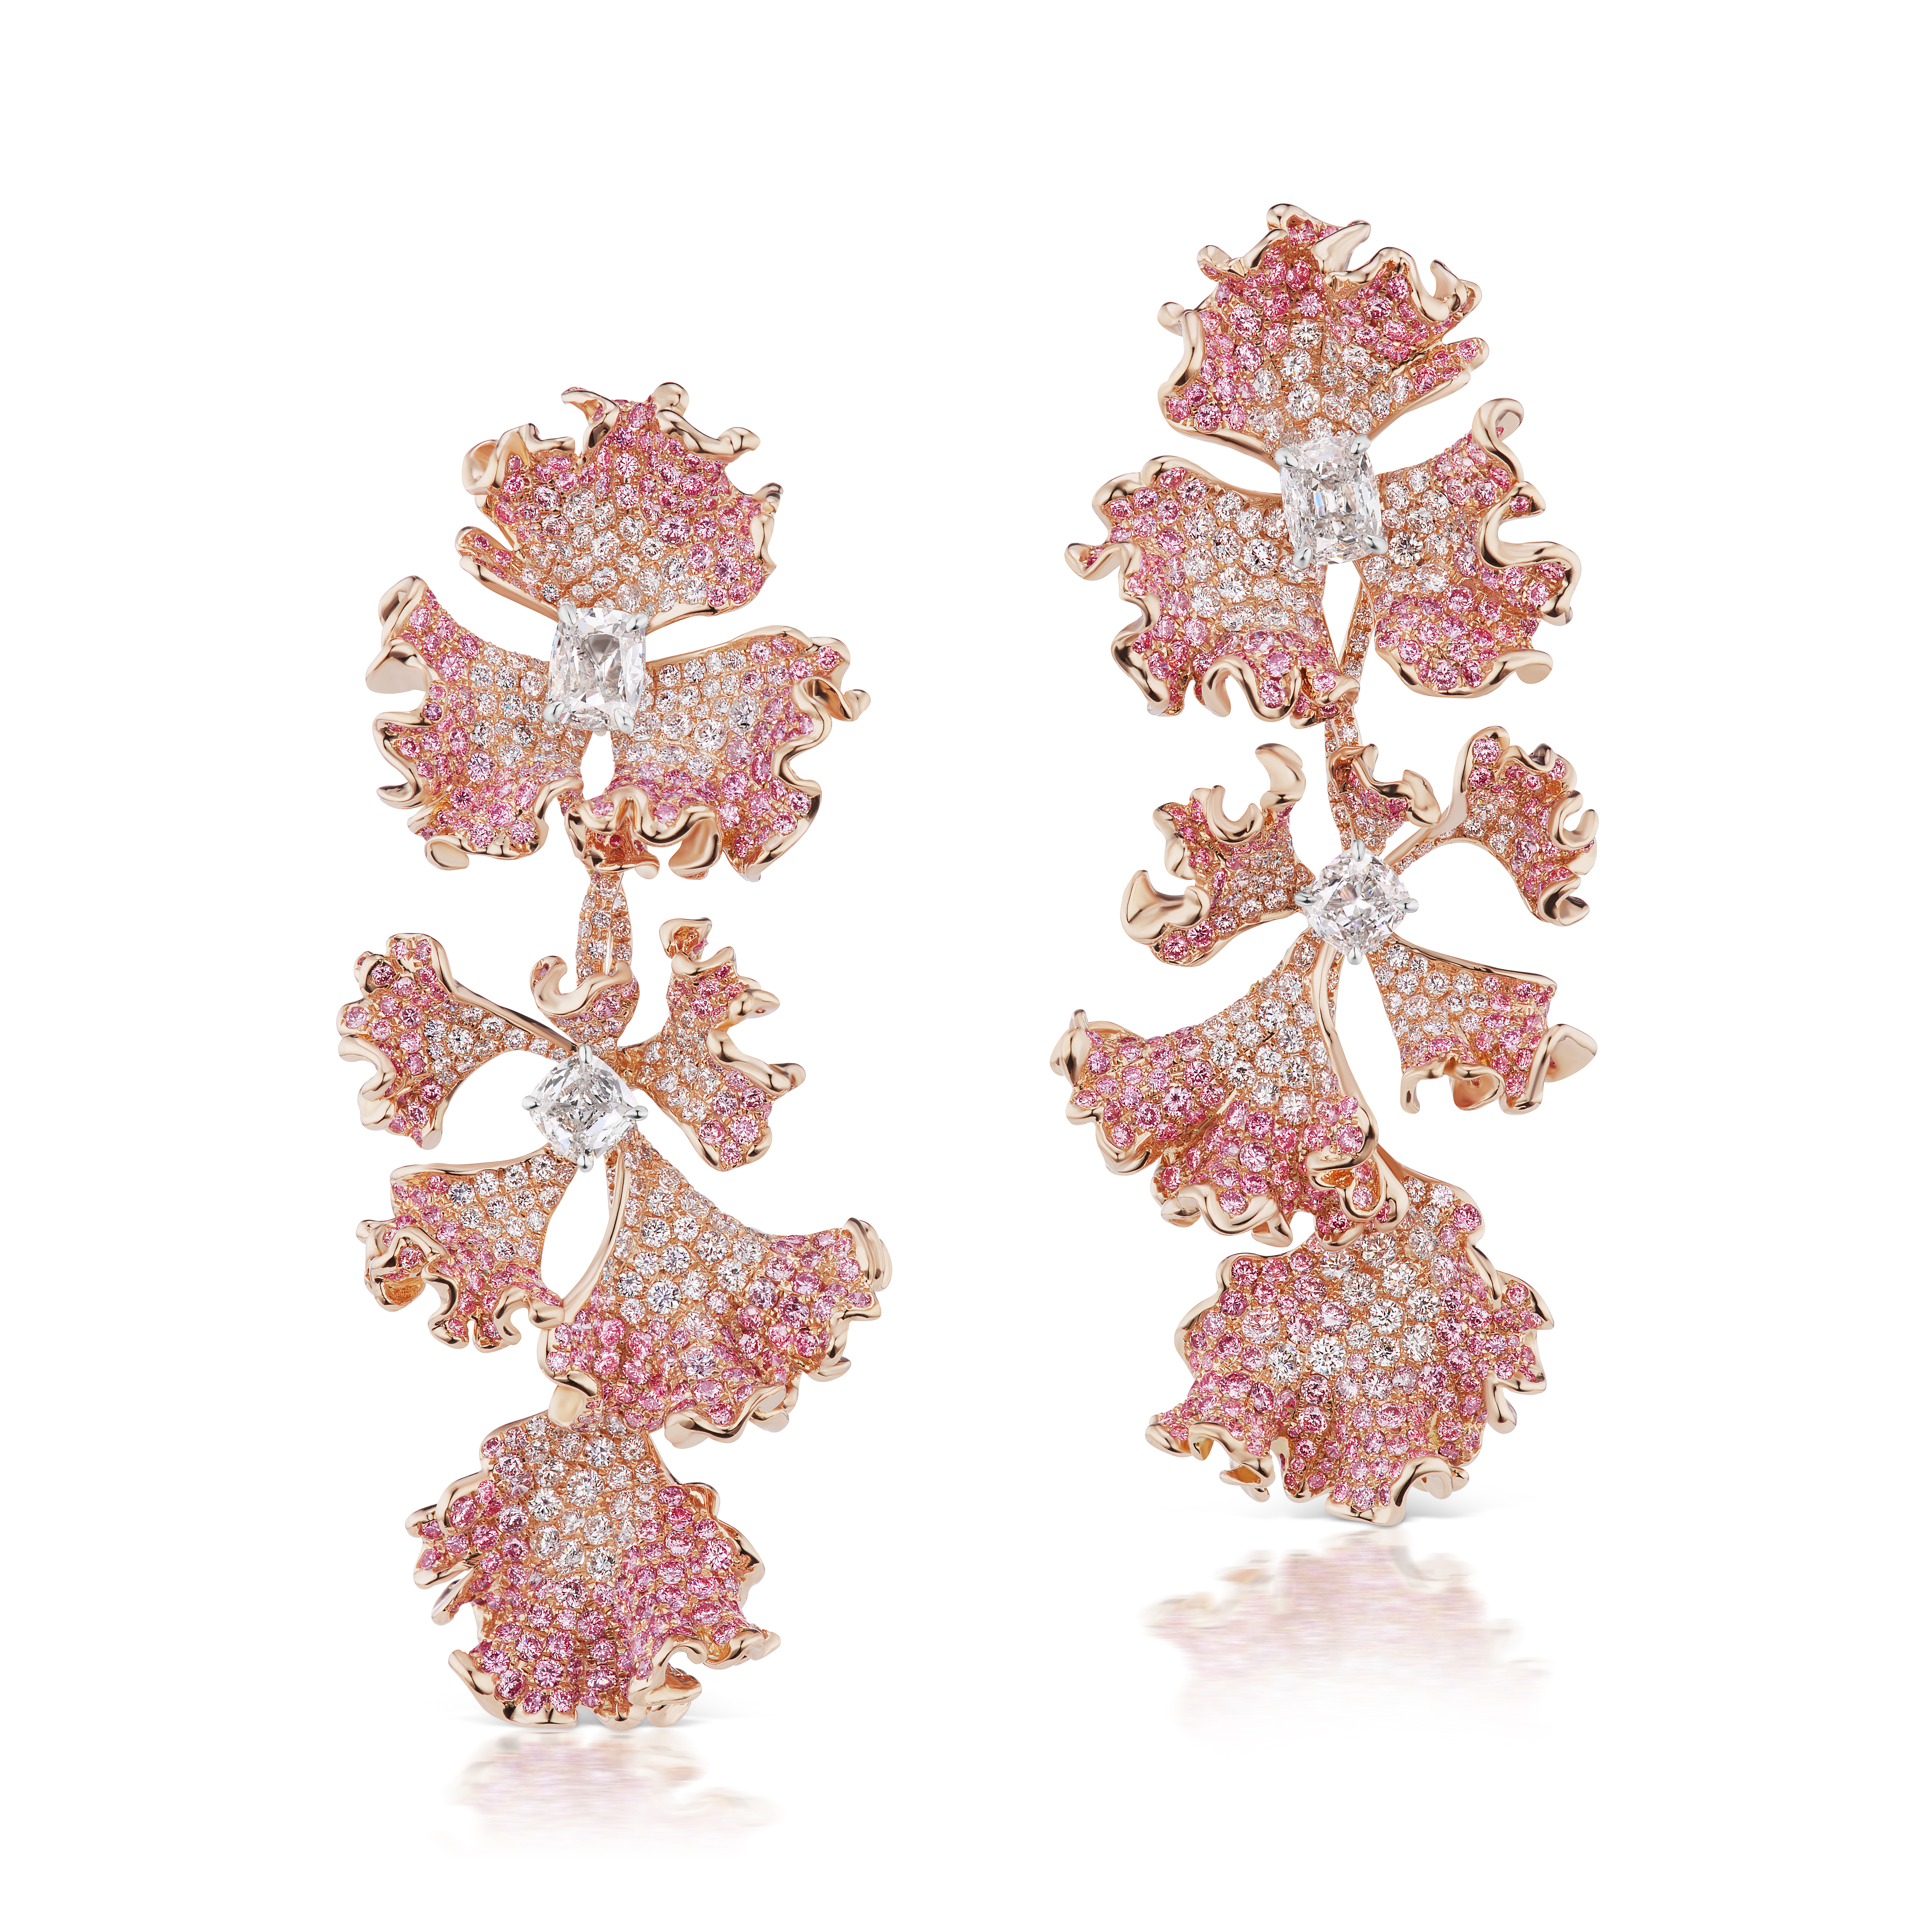 Brassica earrings – 18K rose gold tiered earrings with natural fancy pink and white diamonds and old mine cushion cut diamonds.